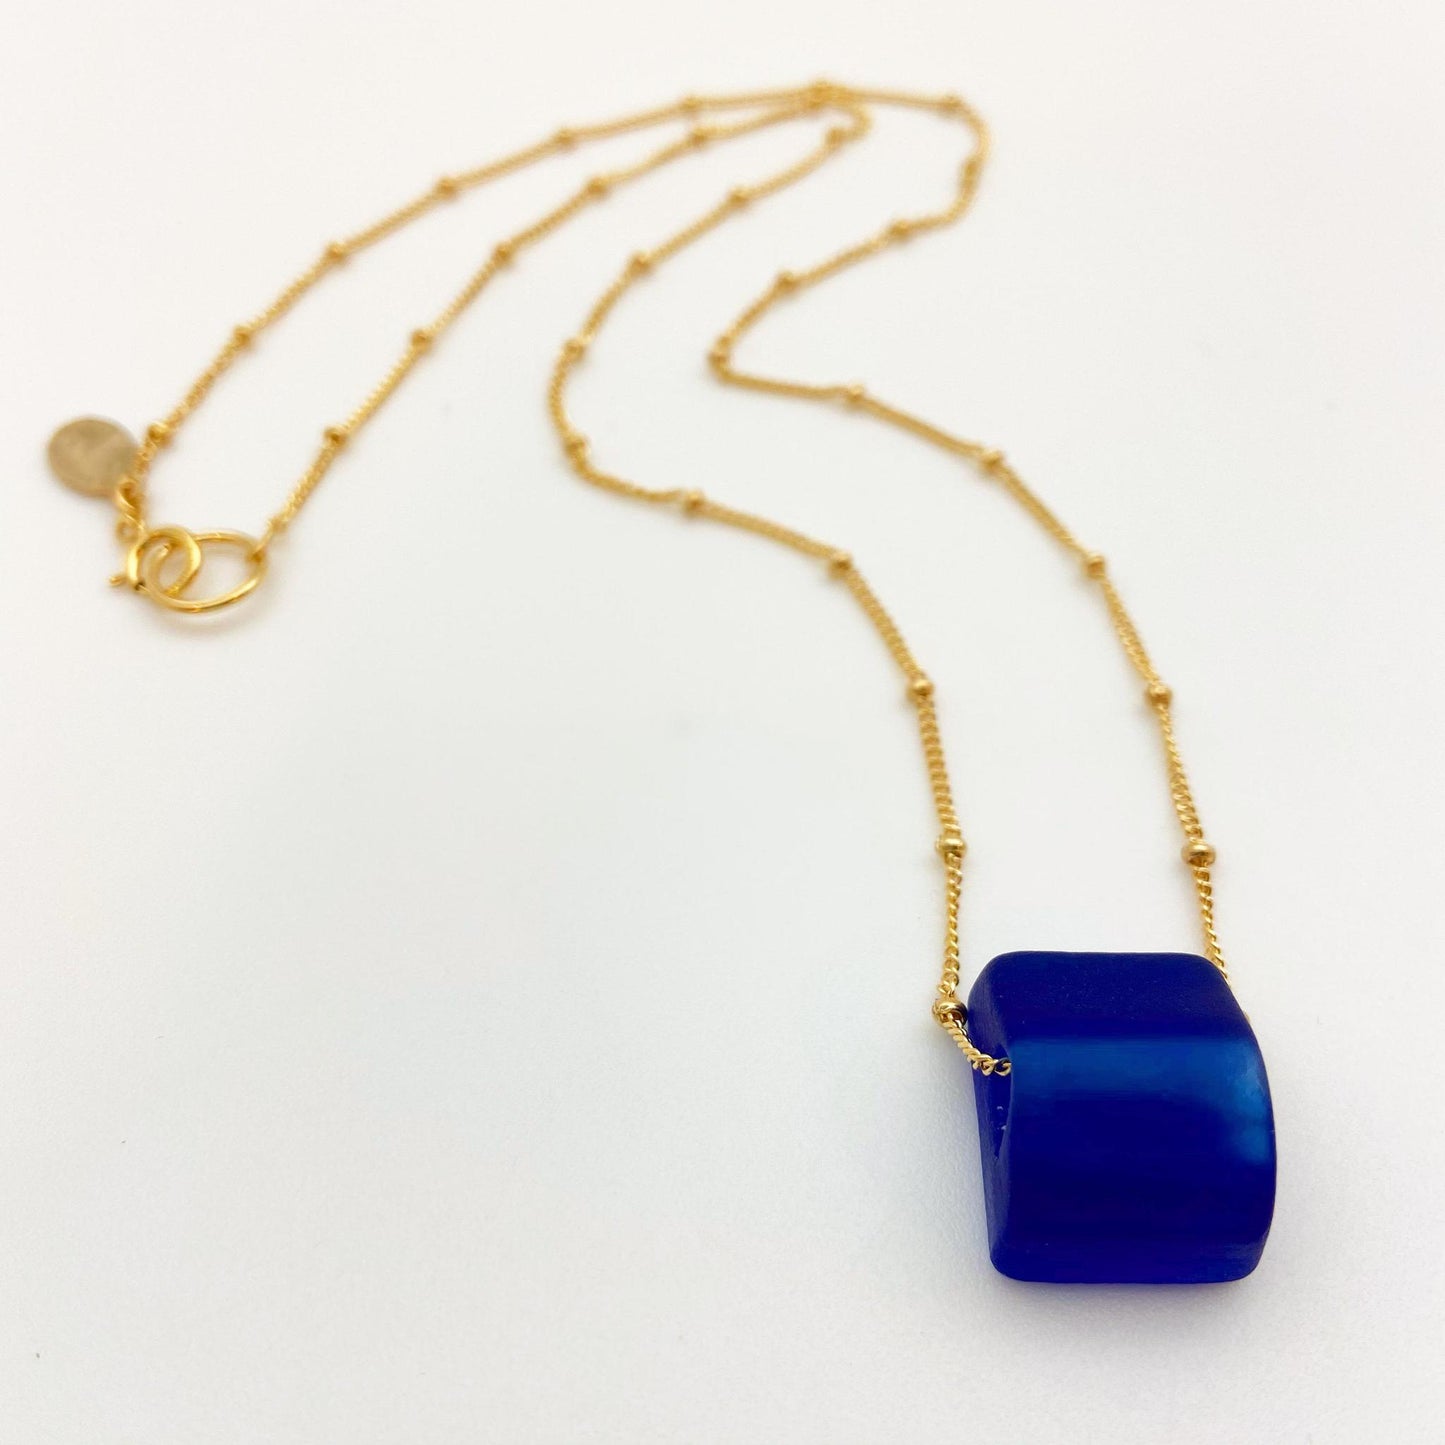 Necklace - Reclaimed Glass Cube on 14kt Goldfill - Cobalt